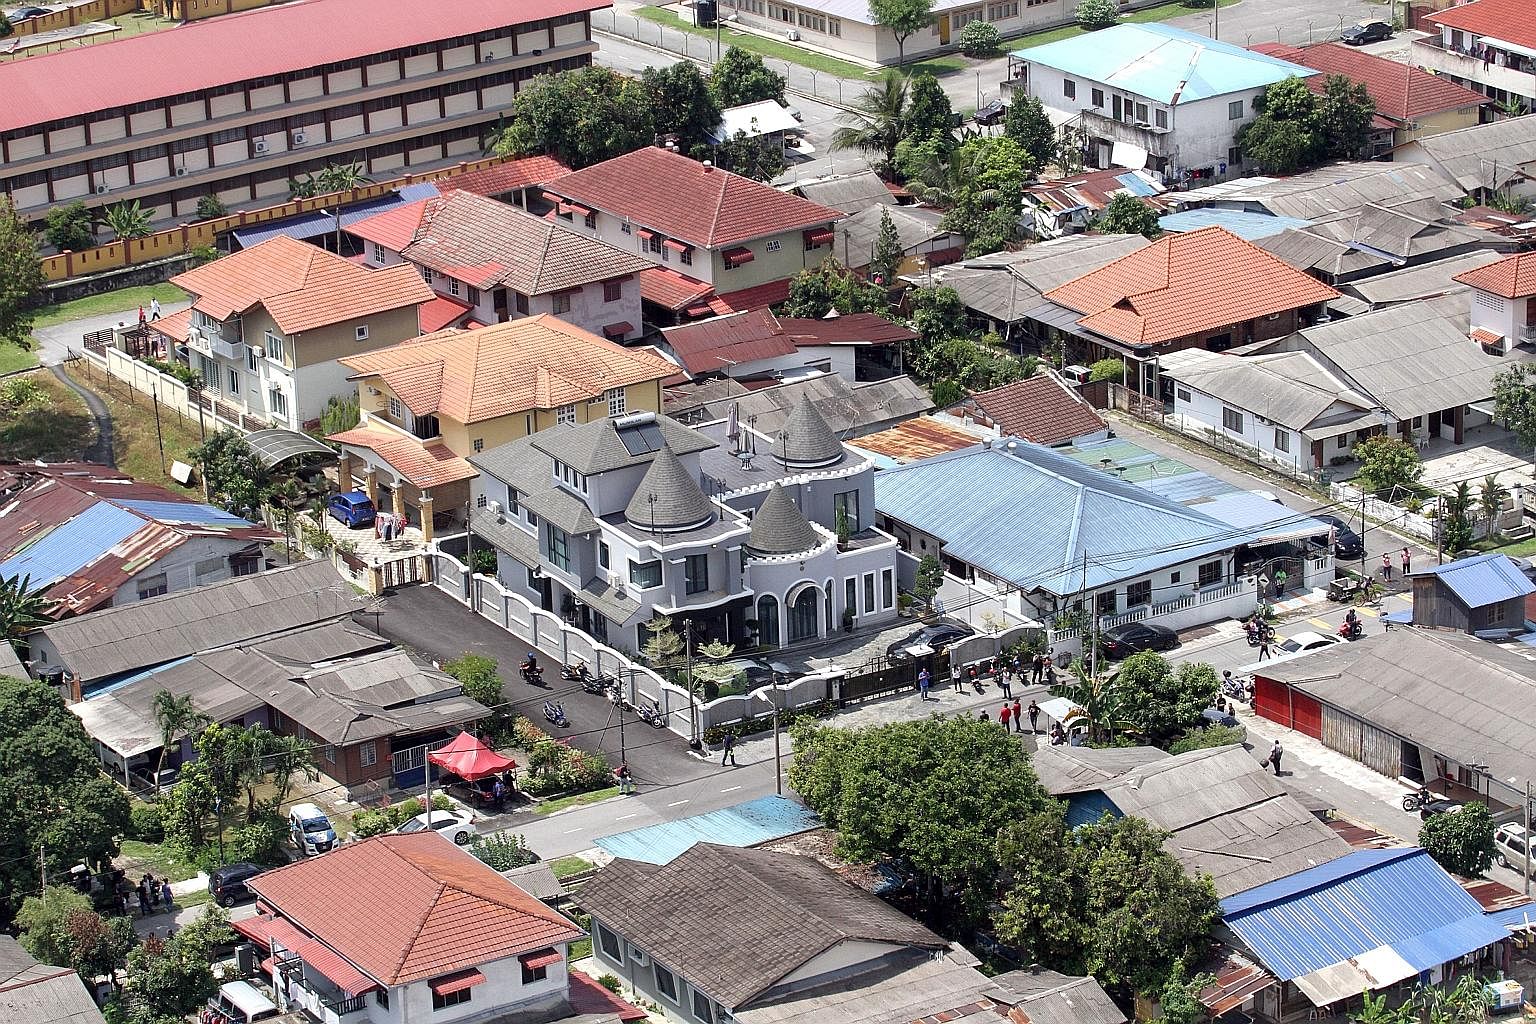 Malaysian PKR Youth chief Adam Rosly (above) owns a bungalow, worth S$2.26 million according to his detractors. The house (right), with its three conical roofs, stands out among the humbler structures in the Malay urban kampung enclave of Ampang.